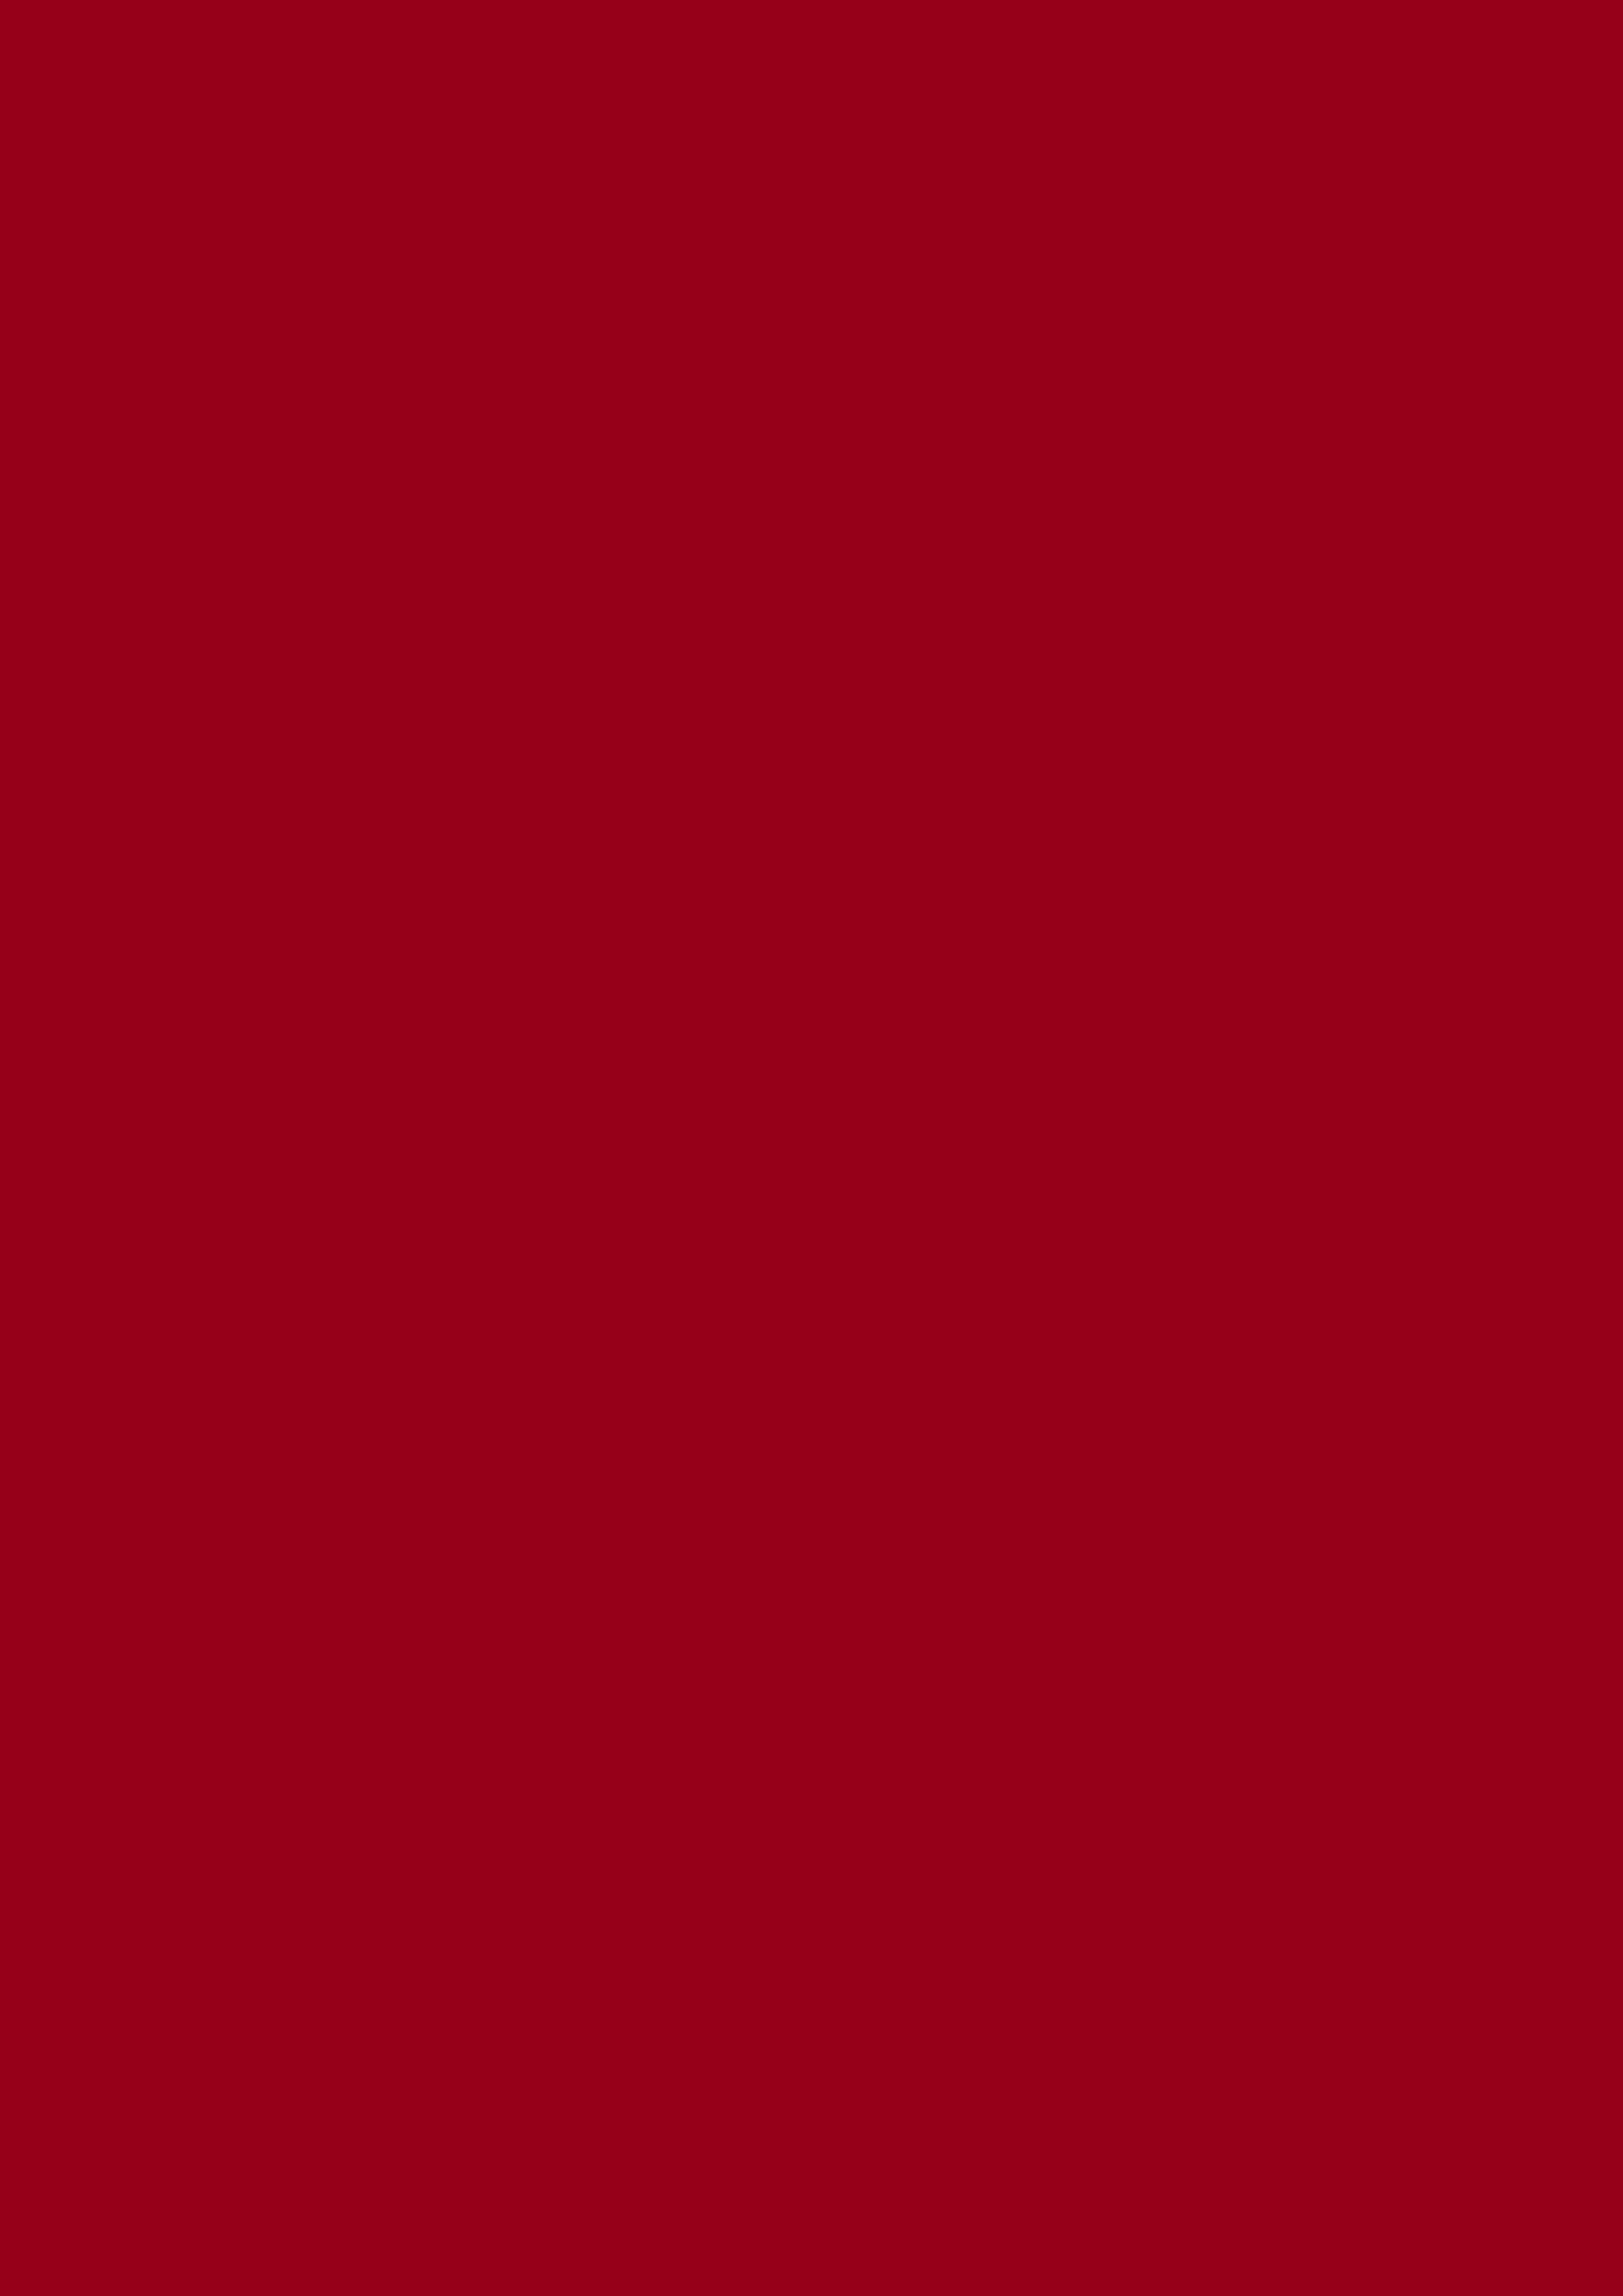 2480x3508 Carmine Solid Color Background